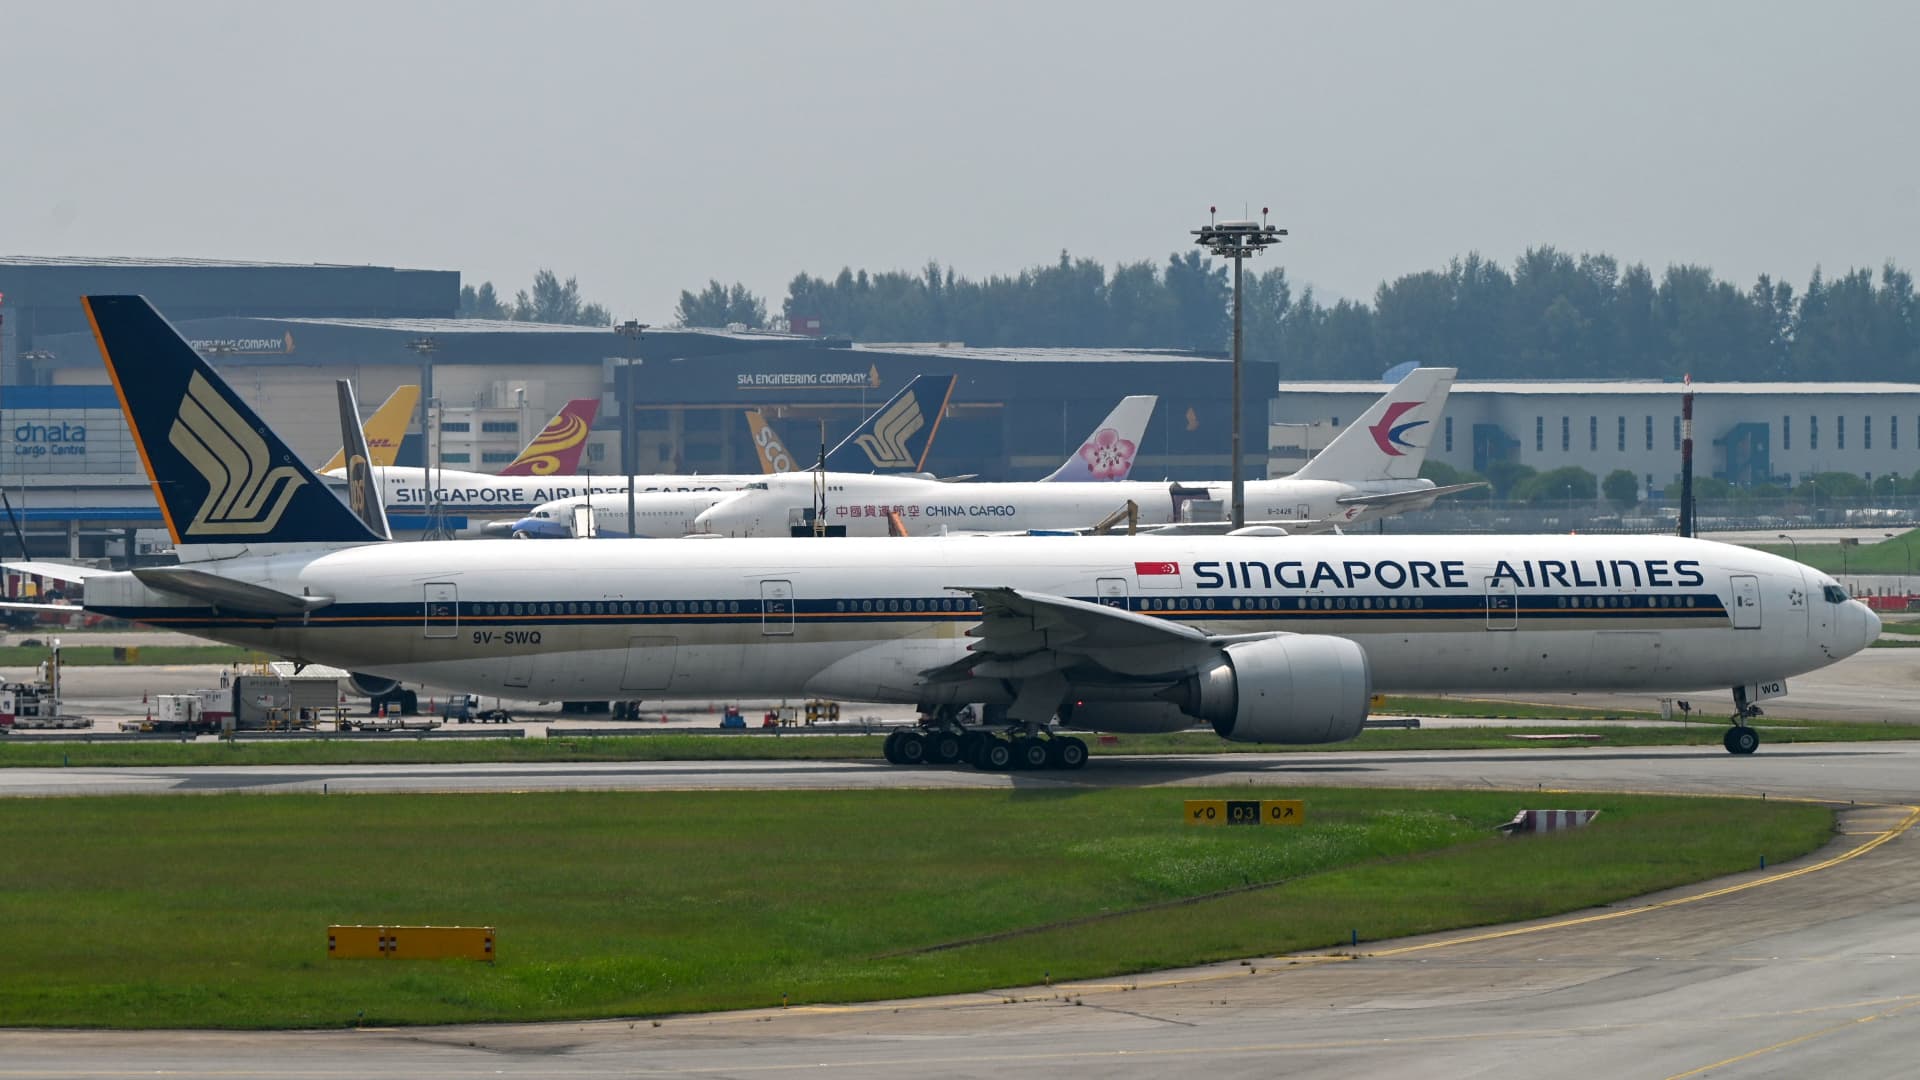 Singapore Airlines said passenger capacity averaged around 61% of pre-pandemic levels in the first quarter and expects a rise to 67% in the second quarter of 2022, the airline said in a statement in May 2022.